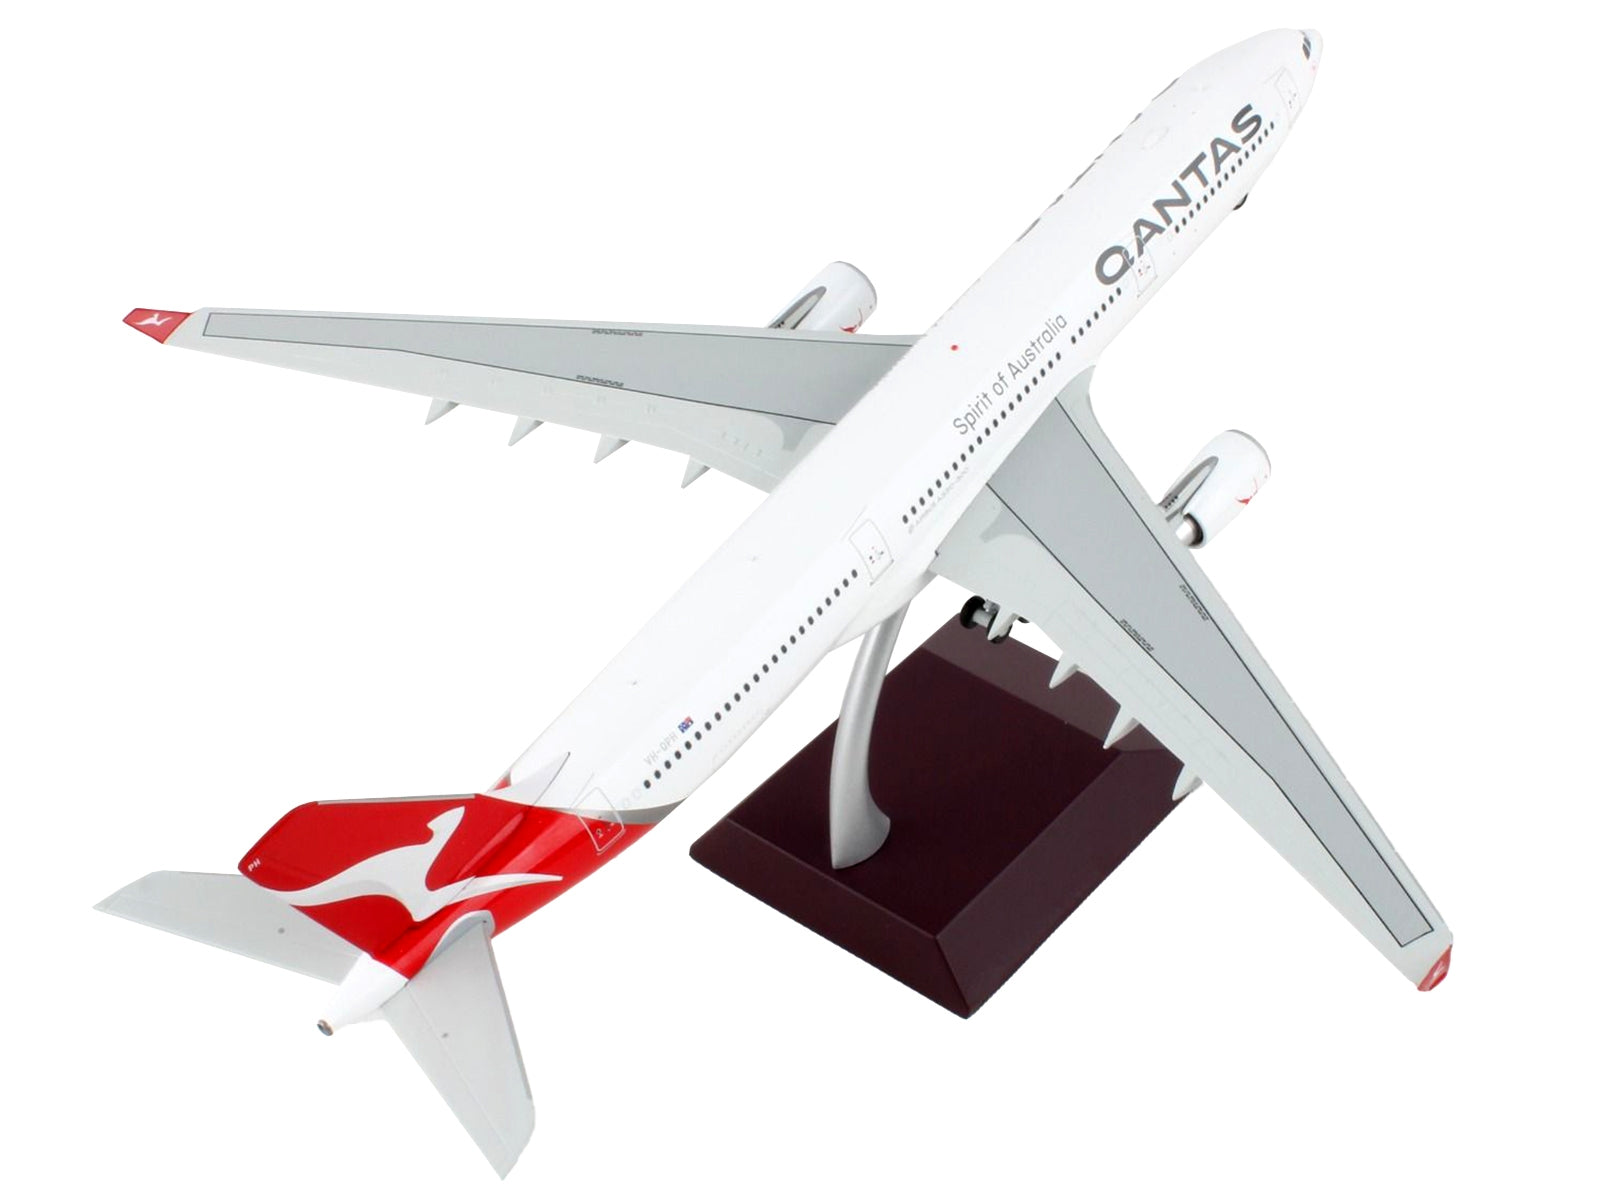 Airbus A330-300 Commercial Aircraft "Qantas Airways - Spirit of Australia" White with Red Tail